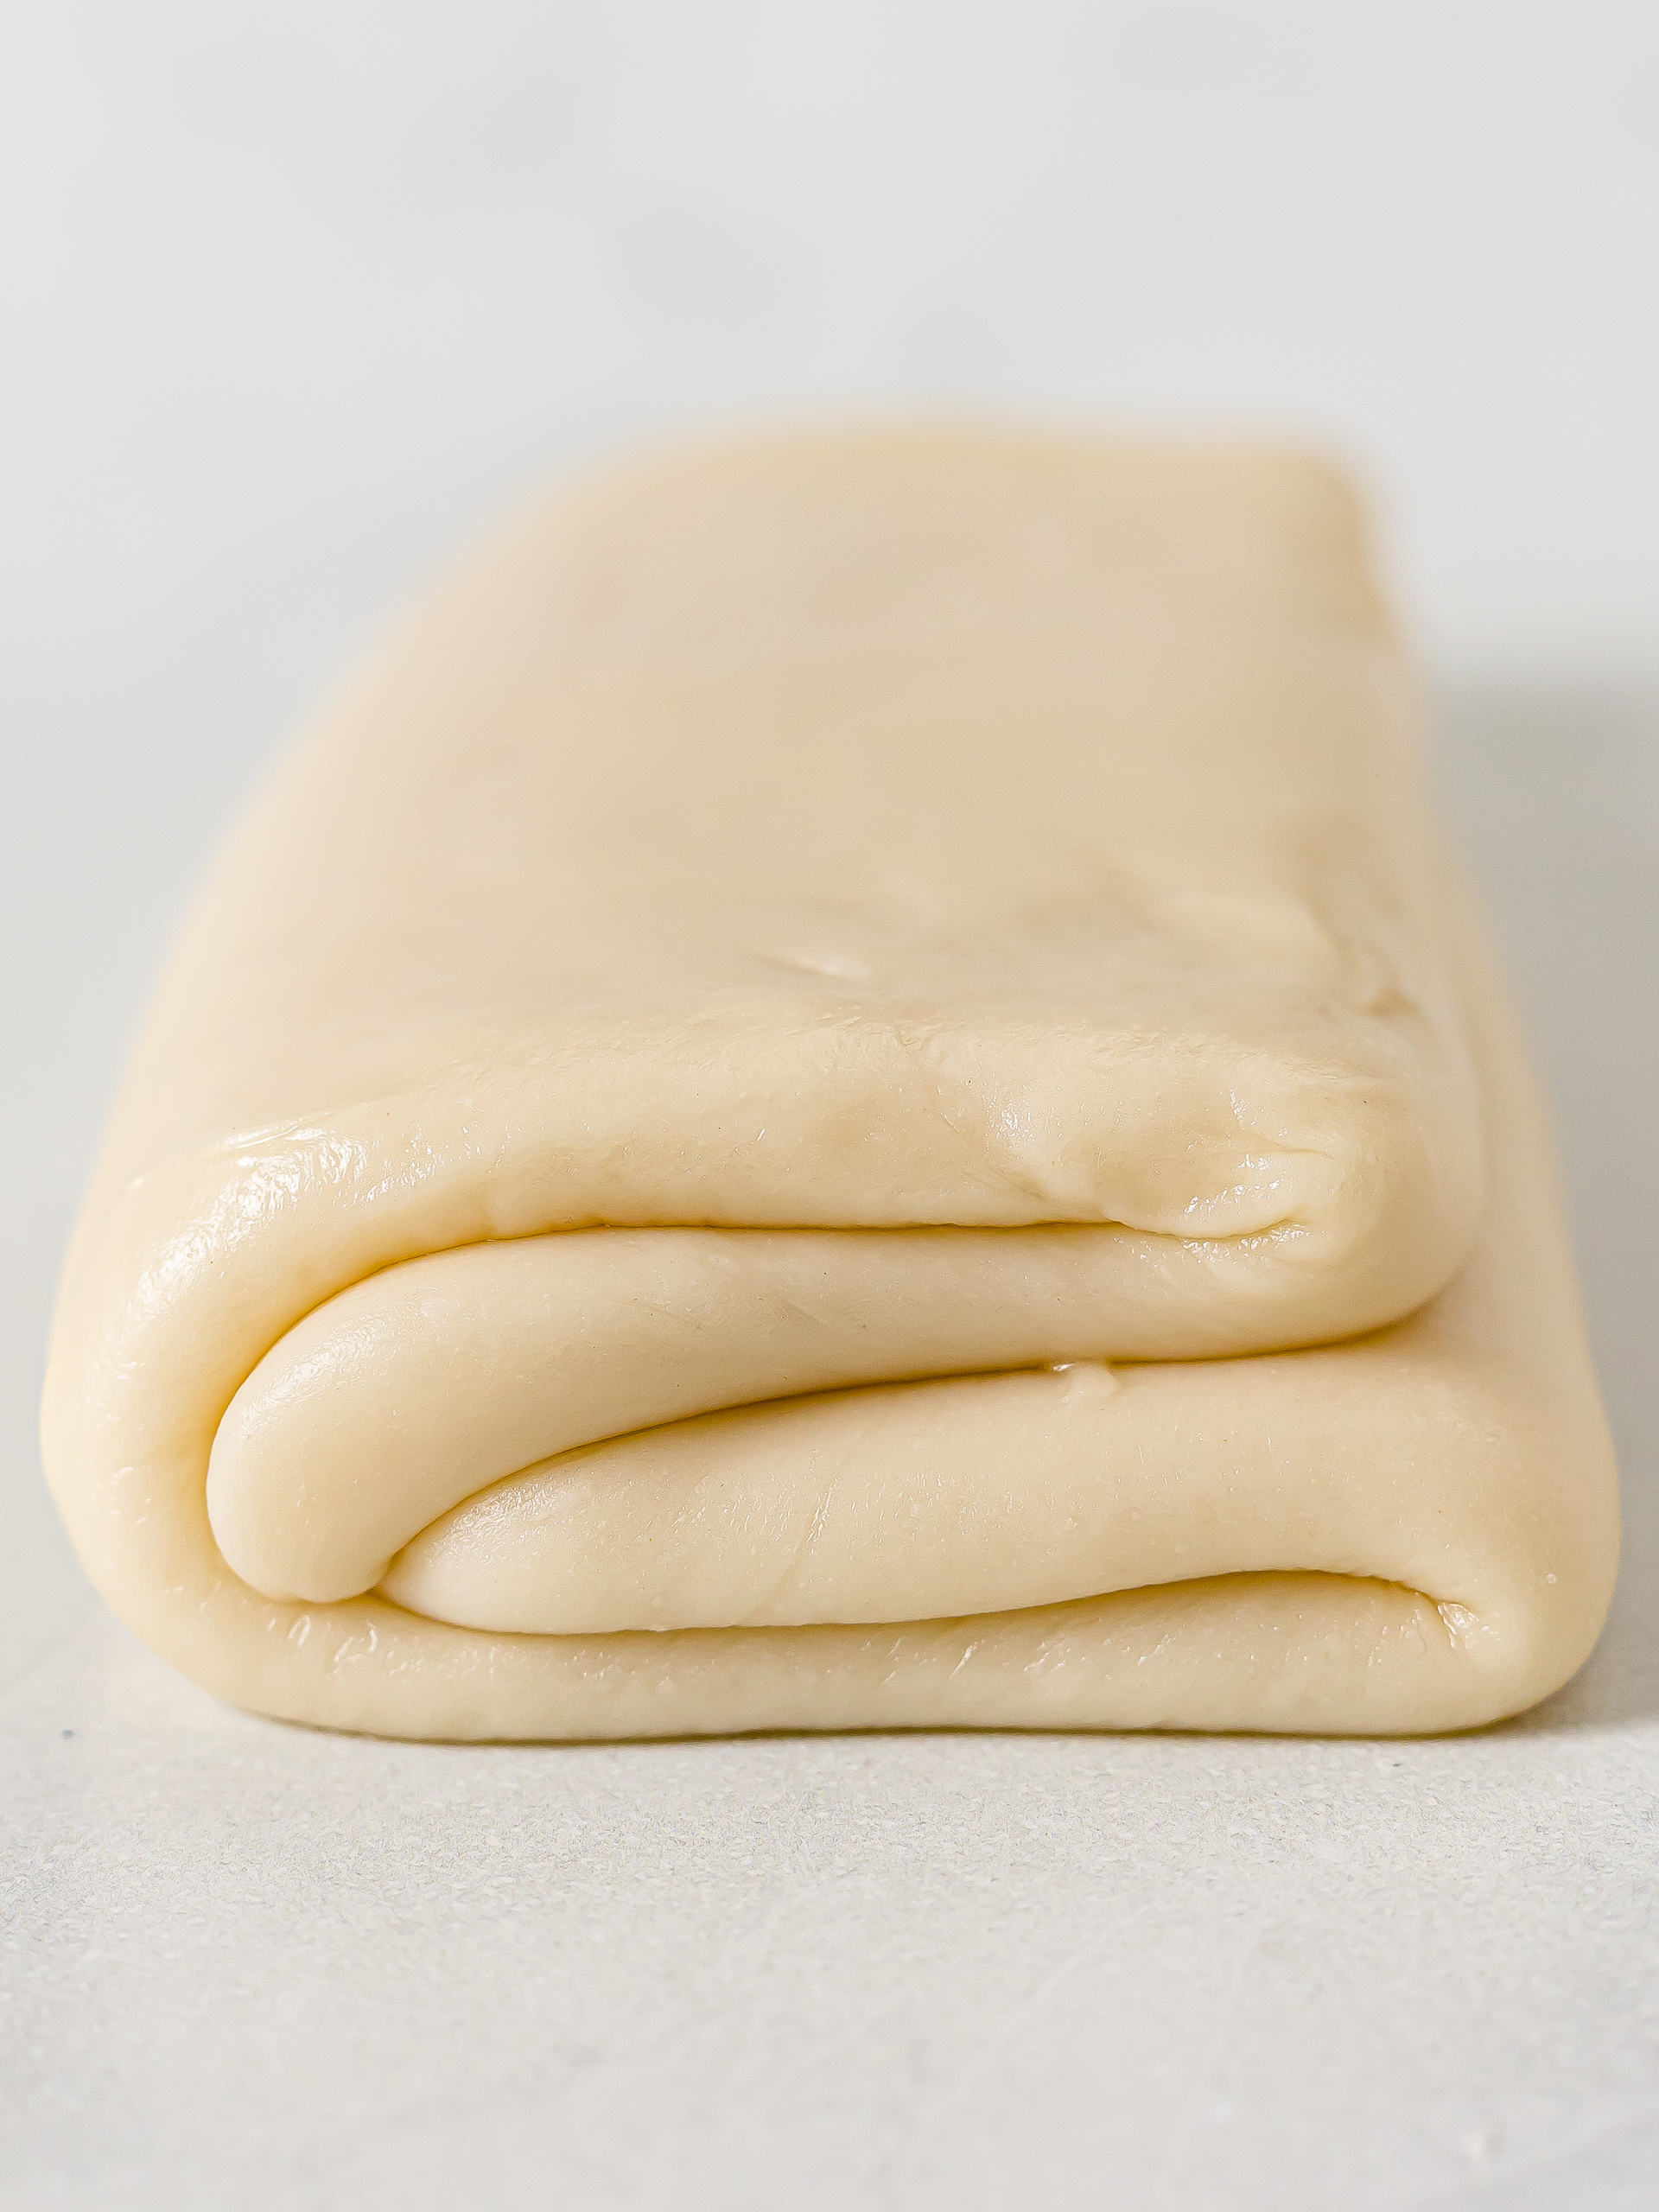 folded pastry dough for lamination